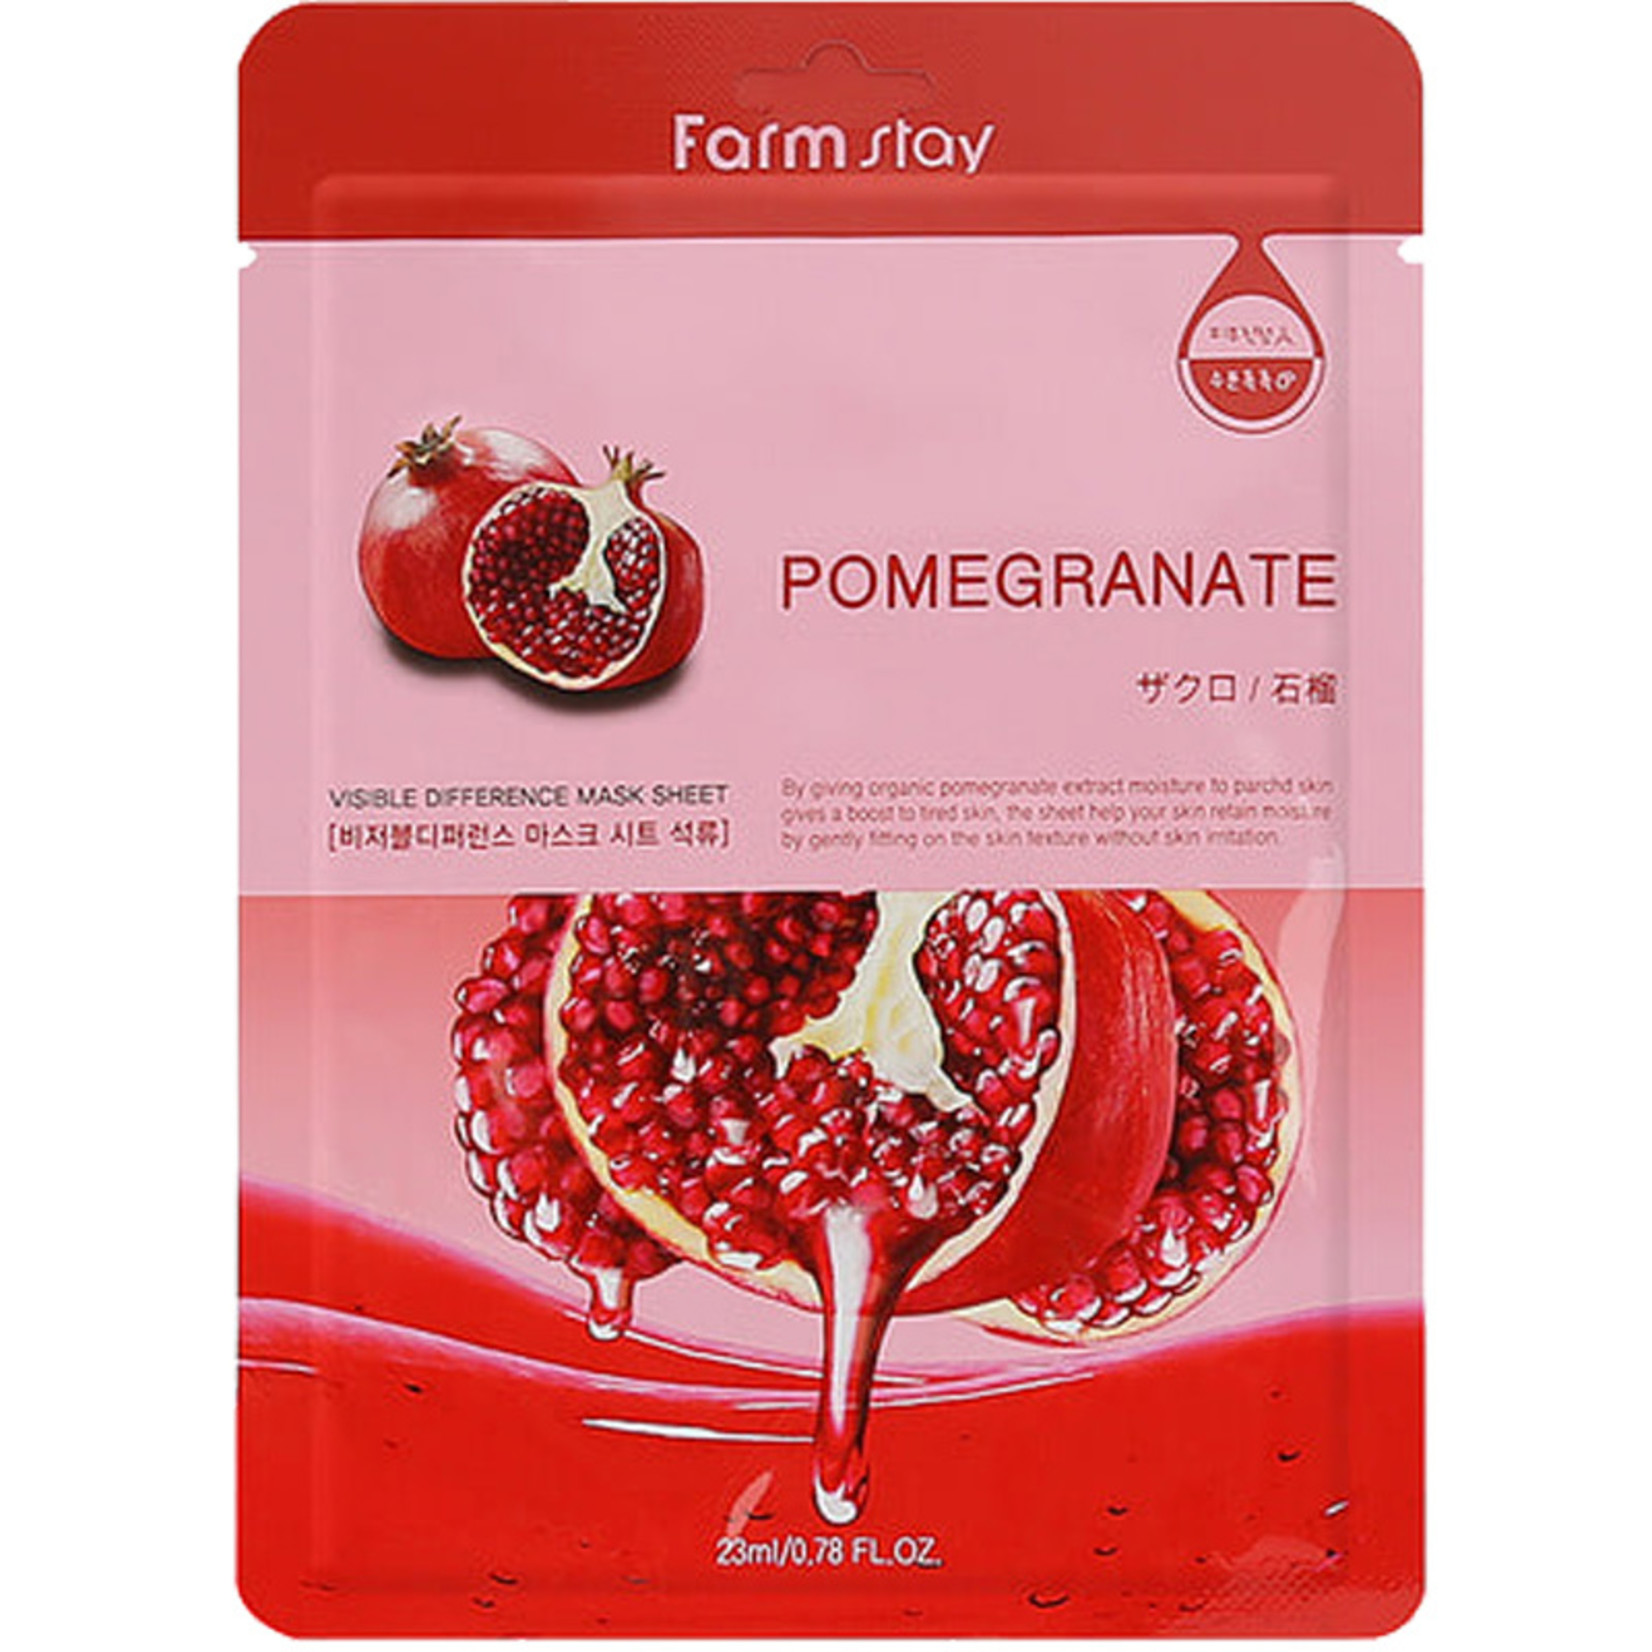 Farm stay Visible Difference Tuchmaske POMEGRANATE